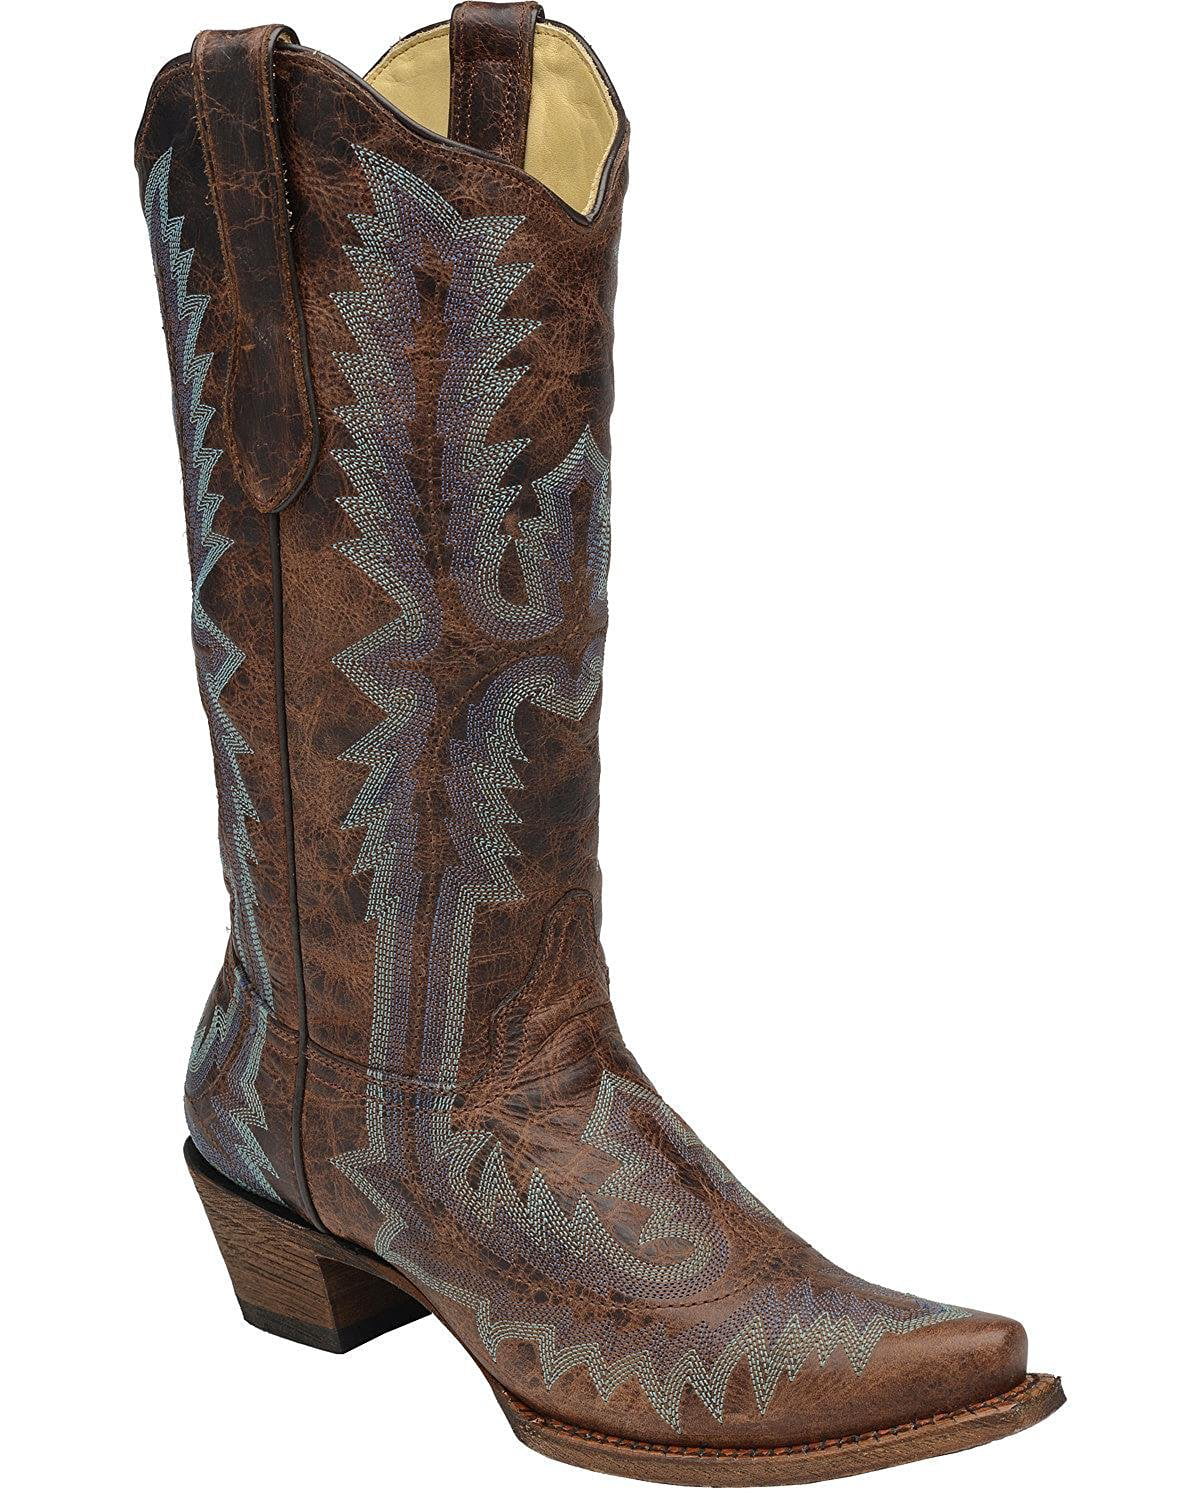 CORRAL Womens Floral Full Stitch Snip Toe Cowgirl Boots G1122